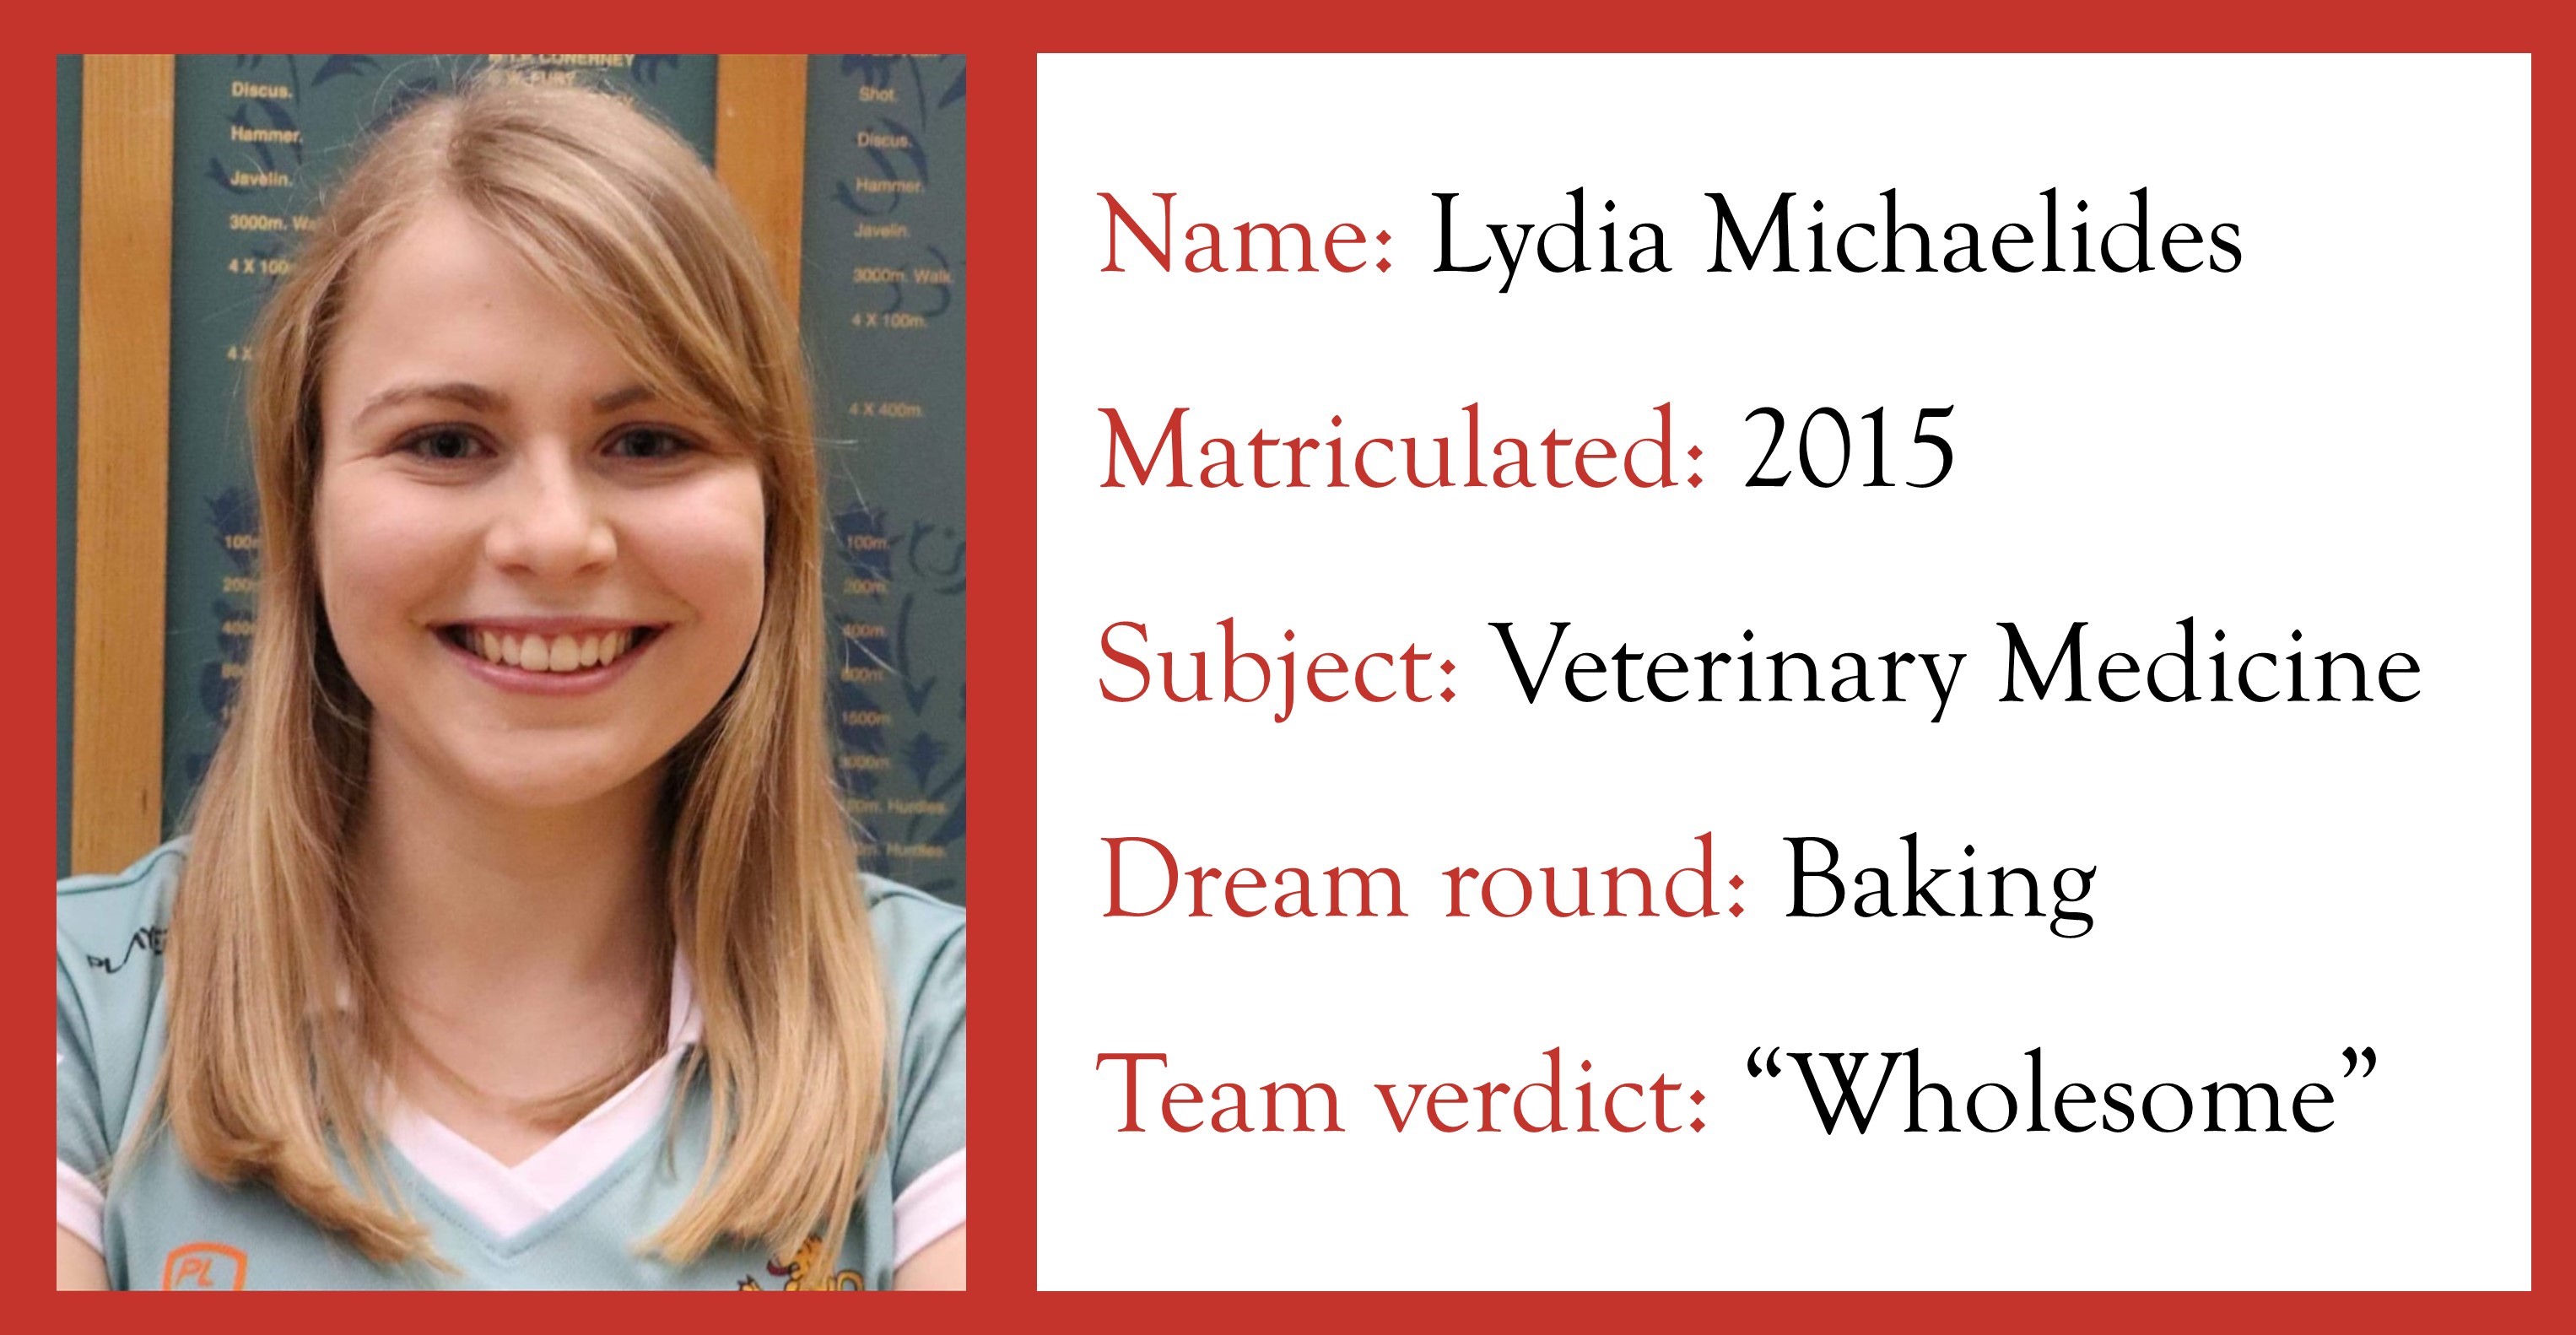 Profile for Lydia Michaelides